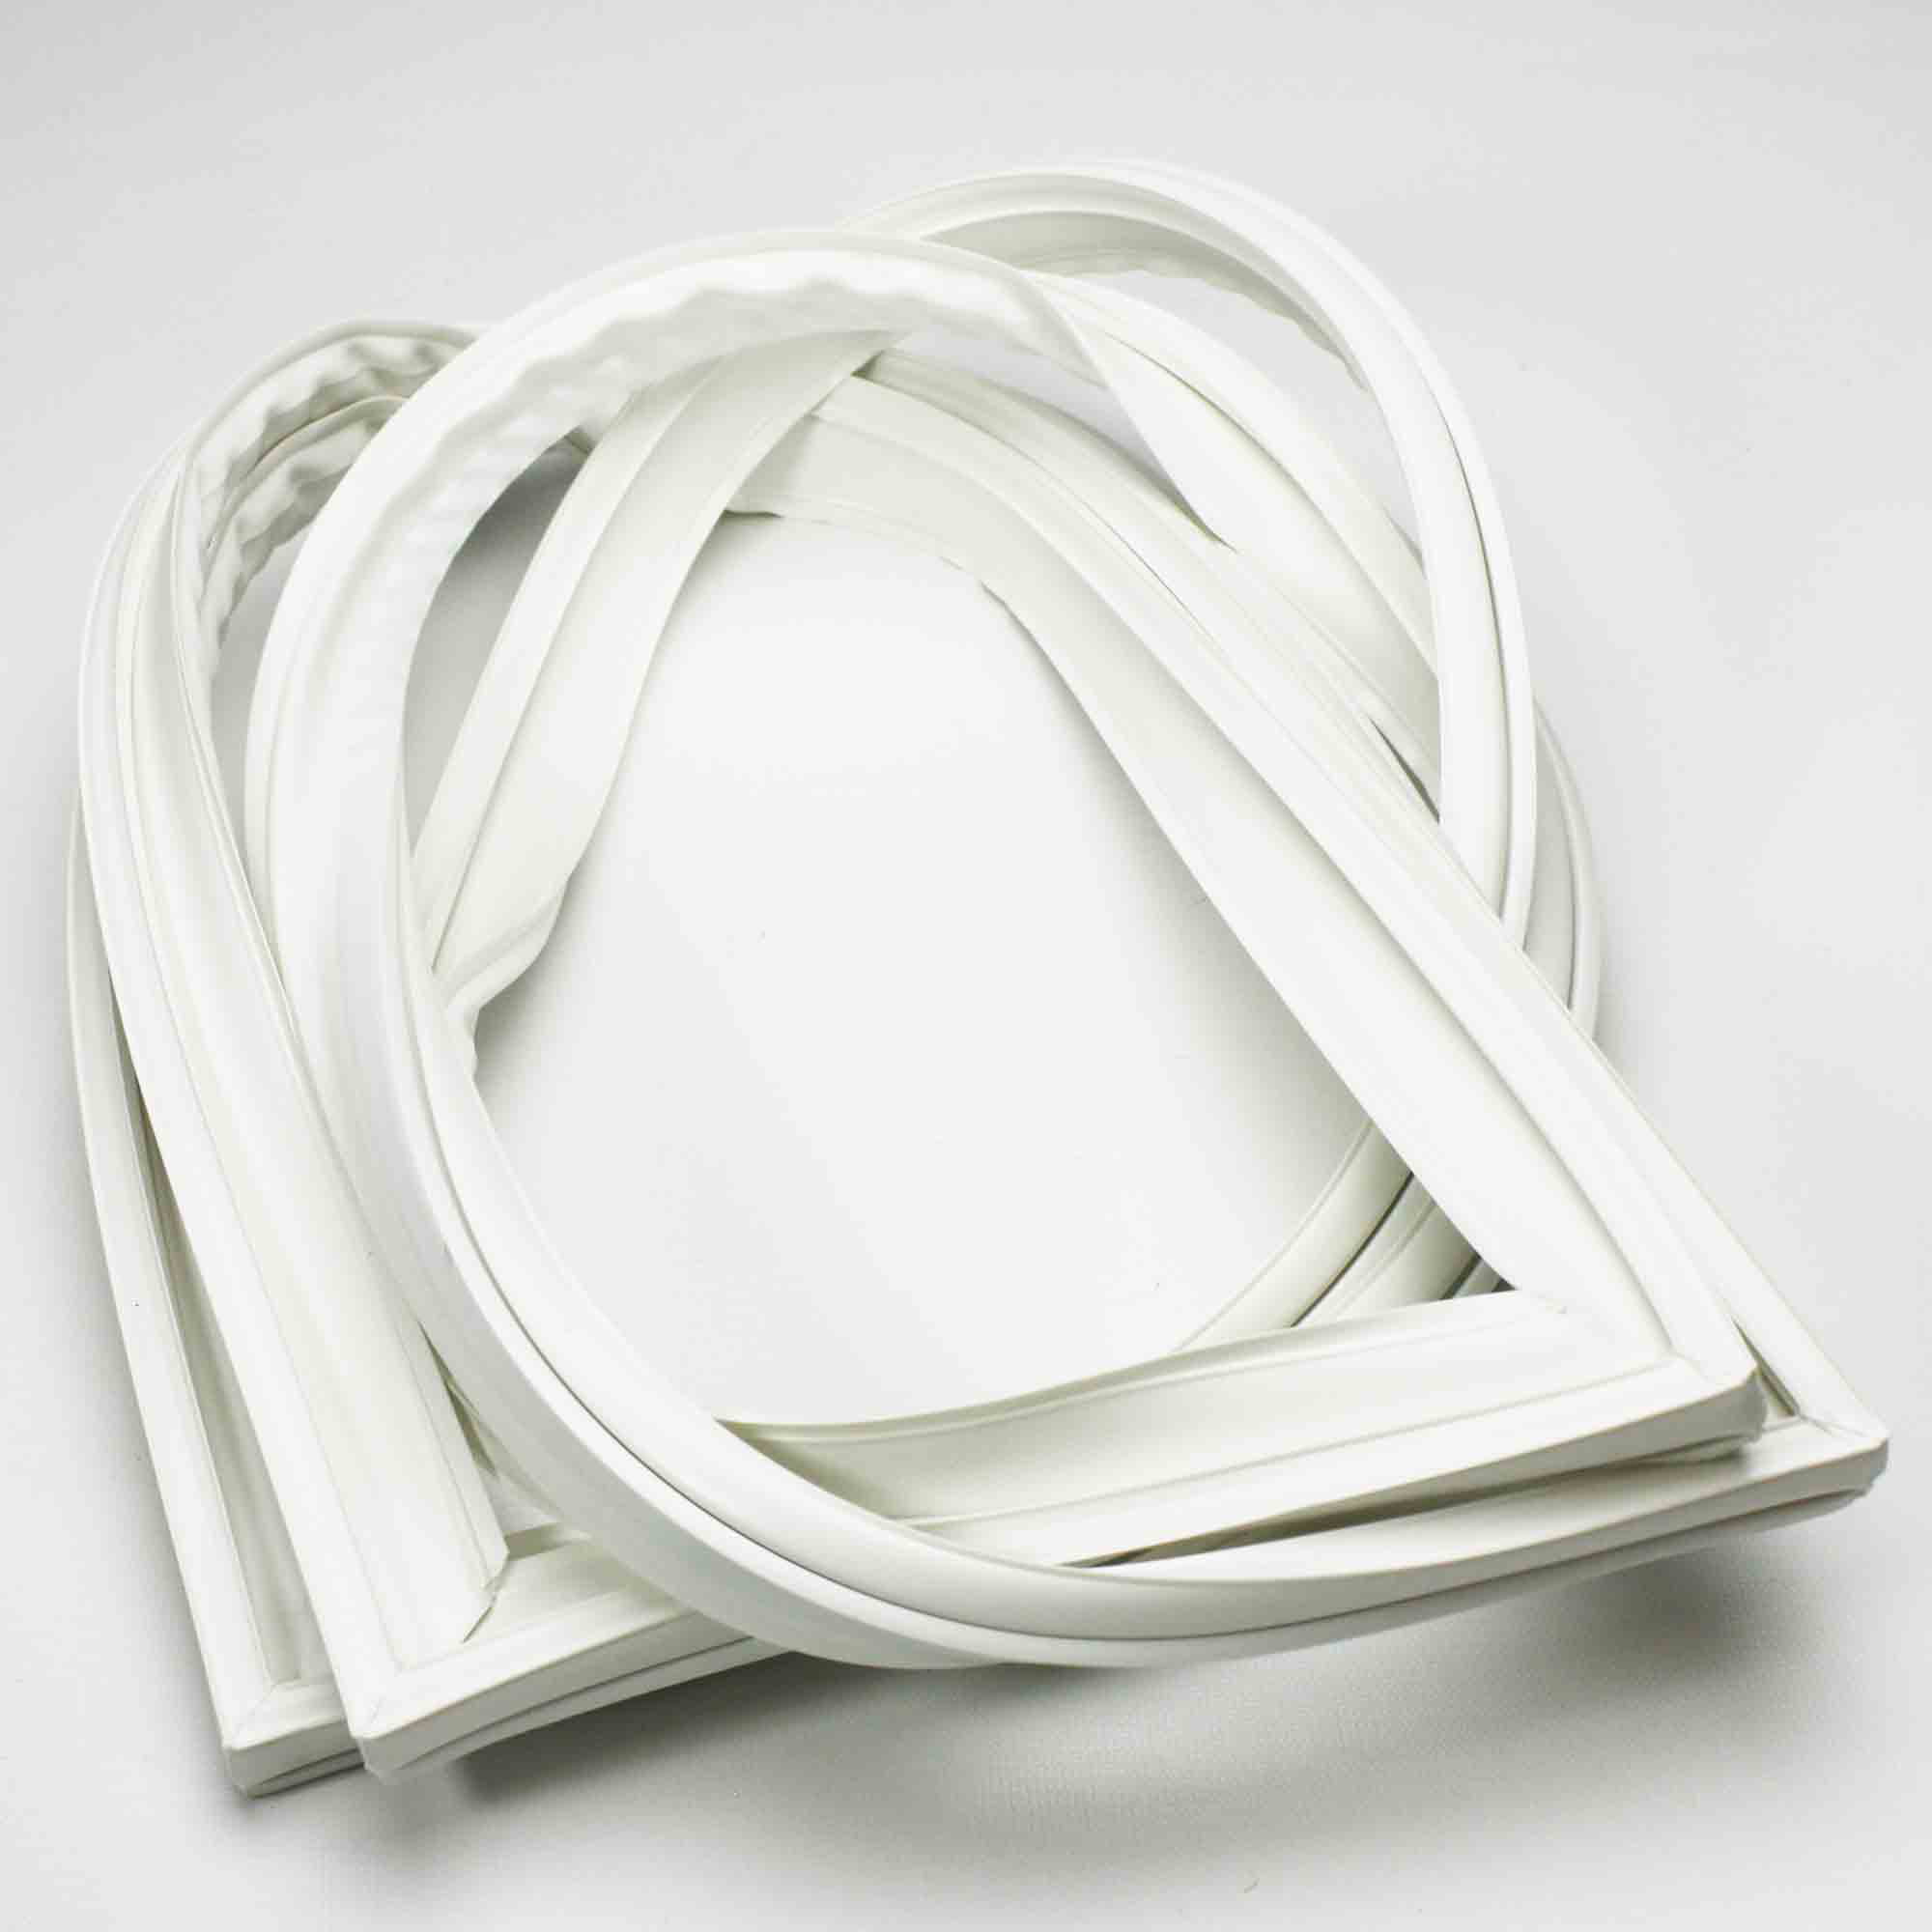 Details about   Refrigerator Fresh Food Door Gasket Seal for Amana 12550111Q PS2007702 AP4013372 